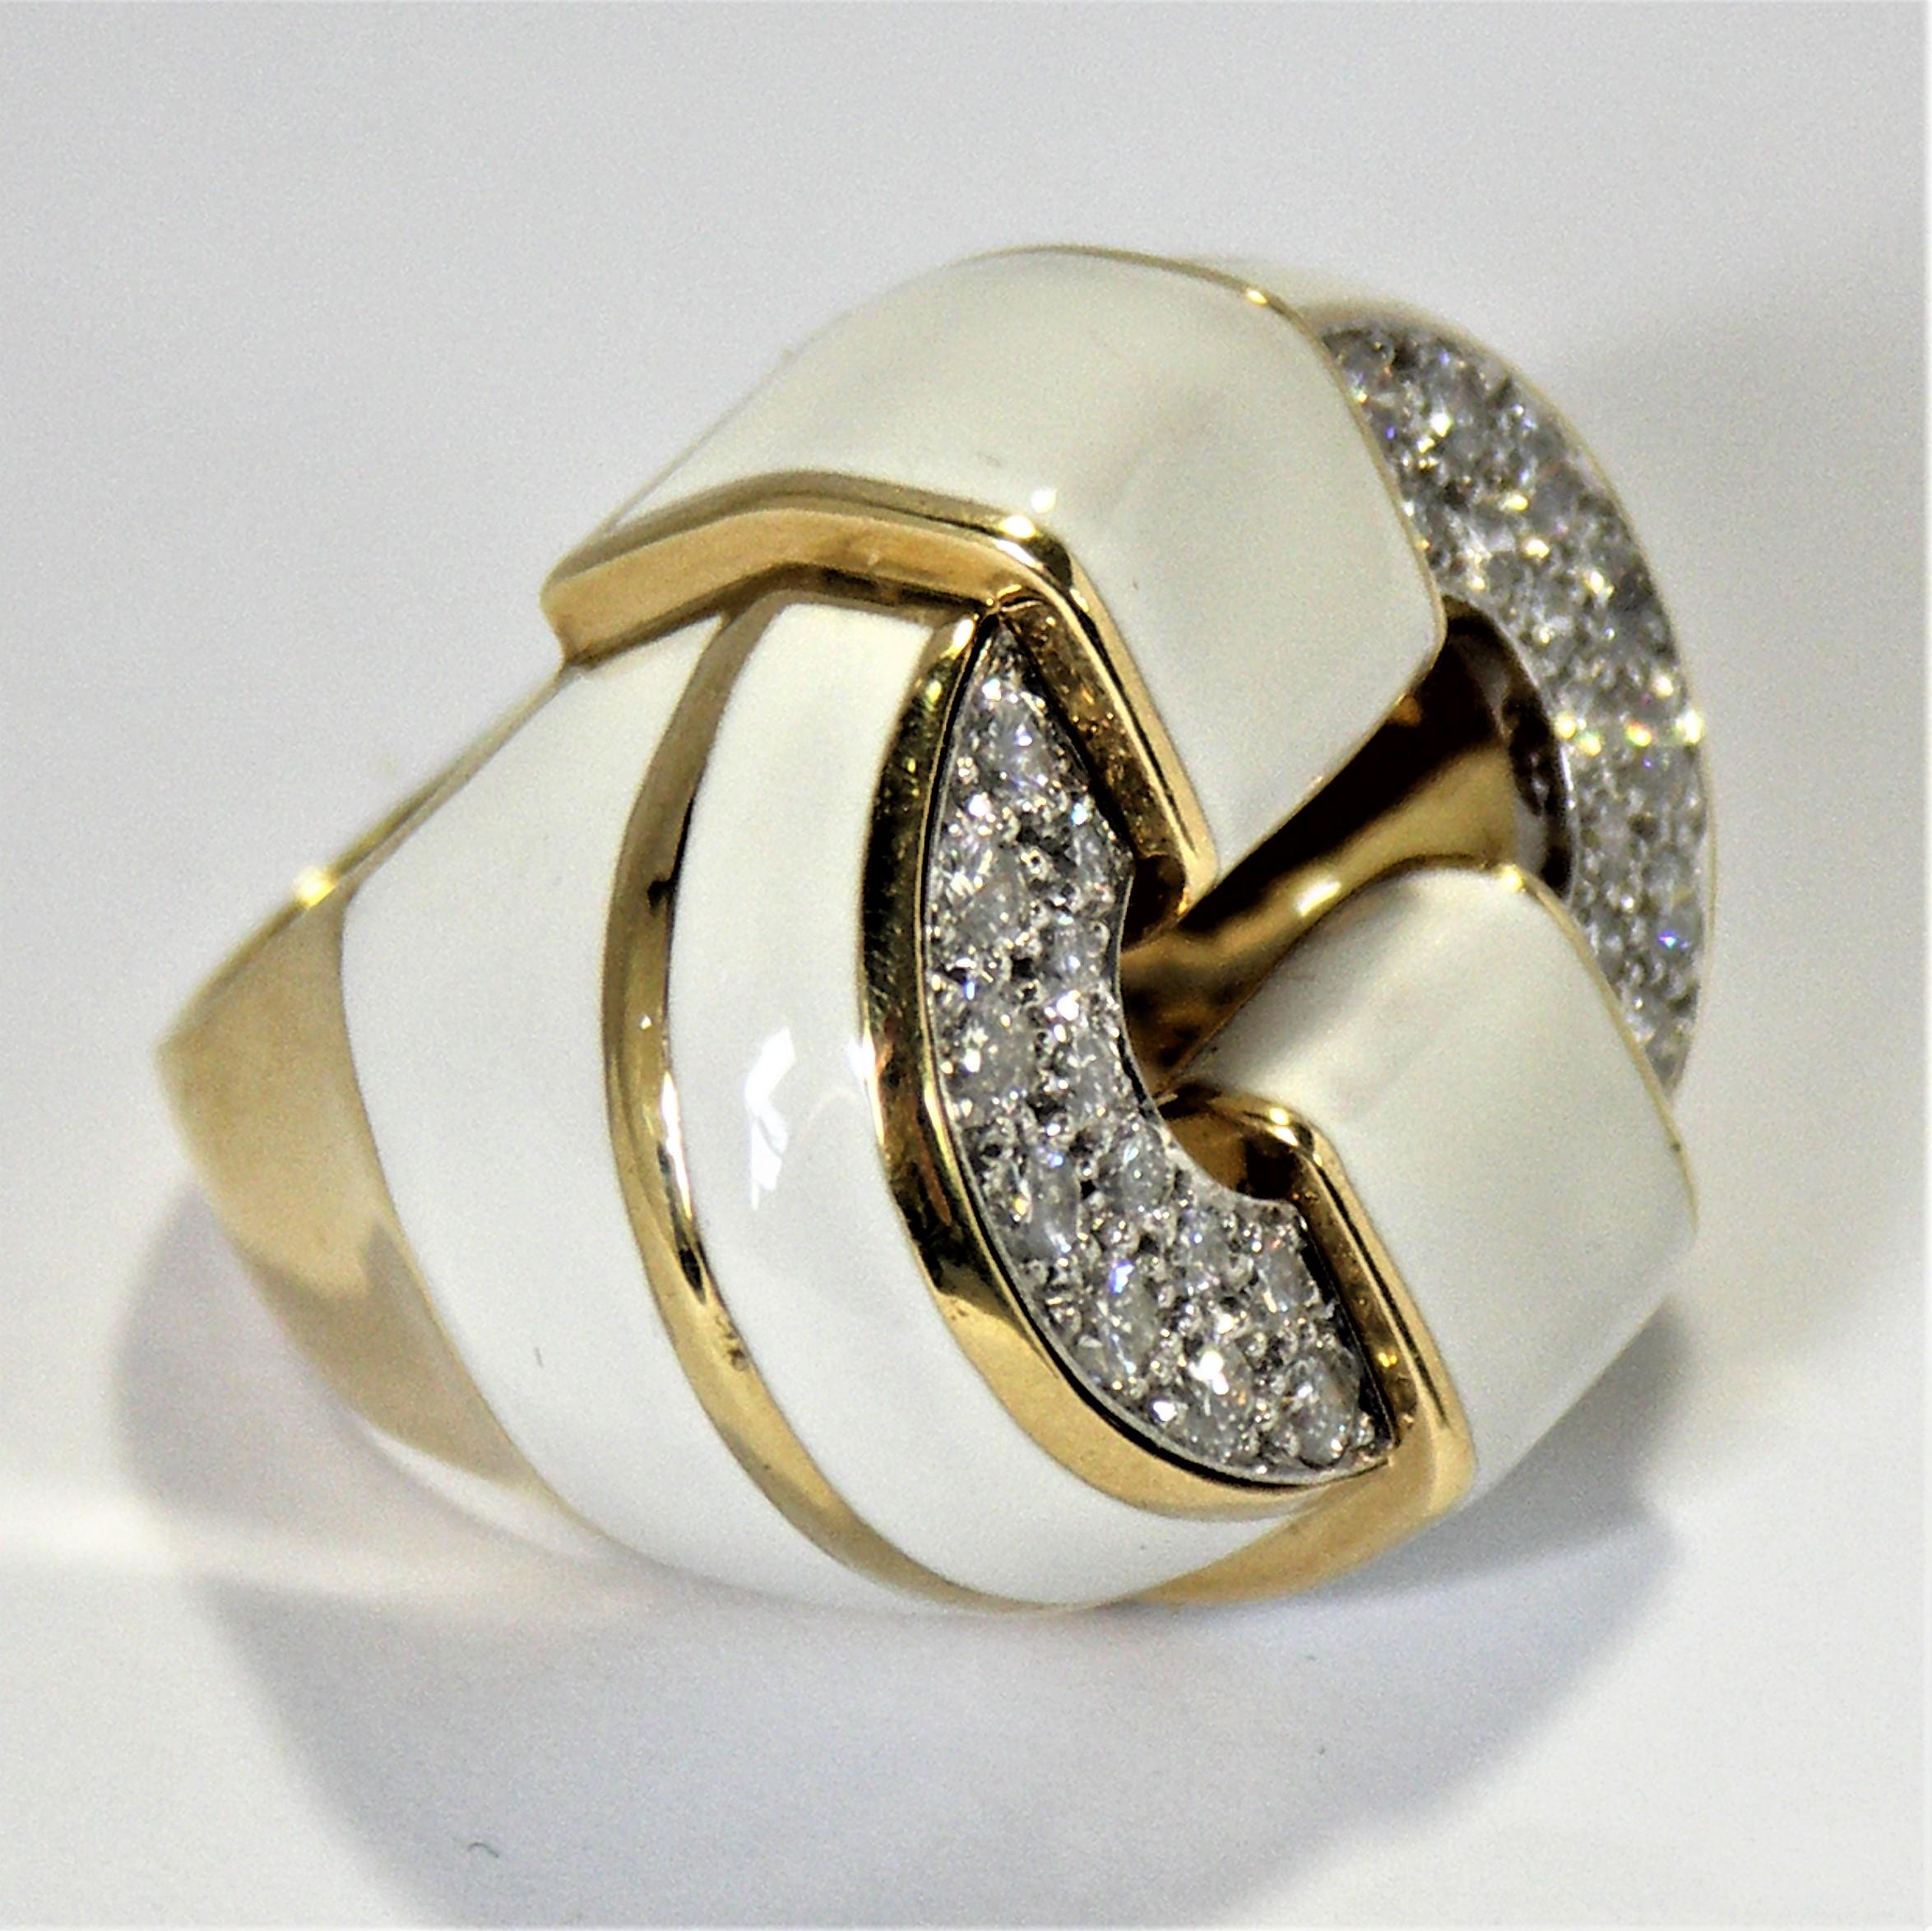 Made of 18K Yellow Gold, this striking off white enamel and diamond ring makes a strong statement. The top oval is pave set with 26 round brilliant cut diamonds weighing an approximate total of 1.00ct of overall G Color VS2 Clarity. Across the top,